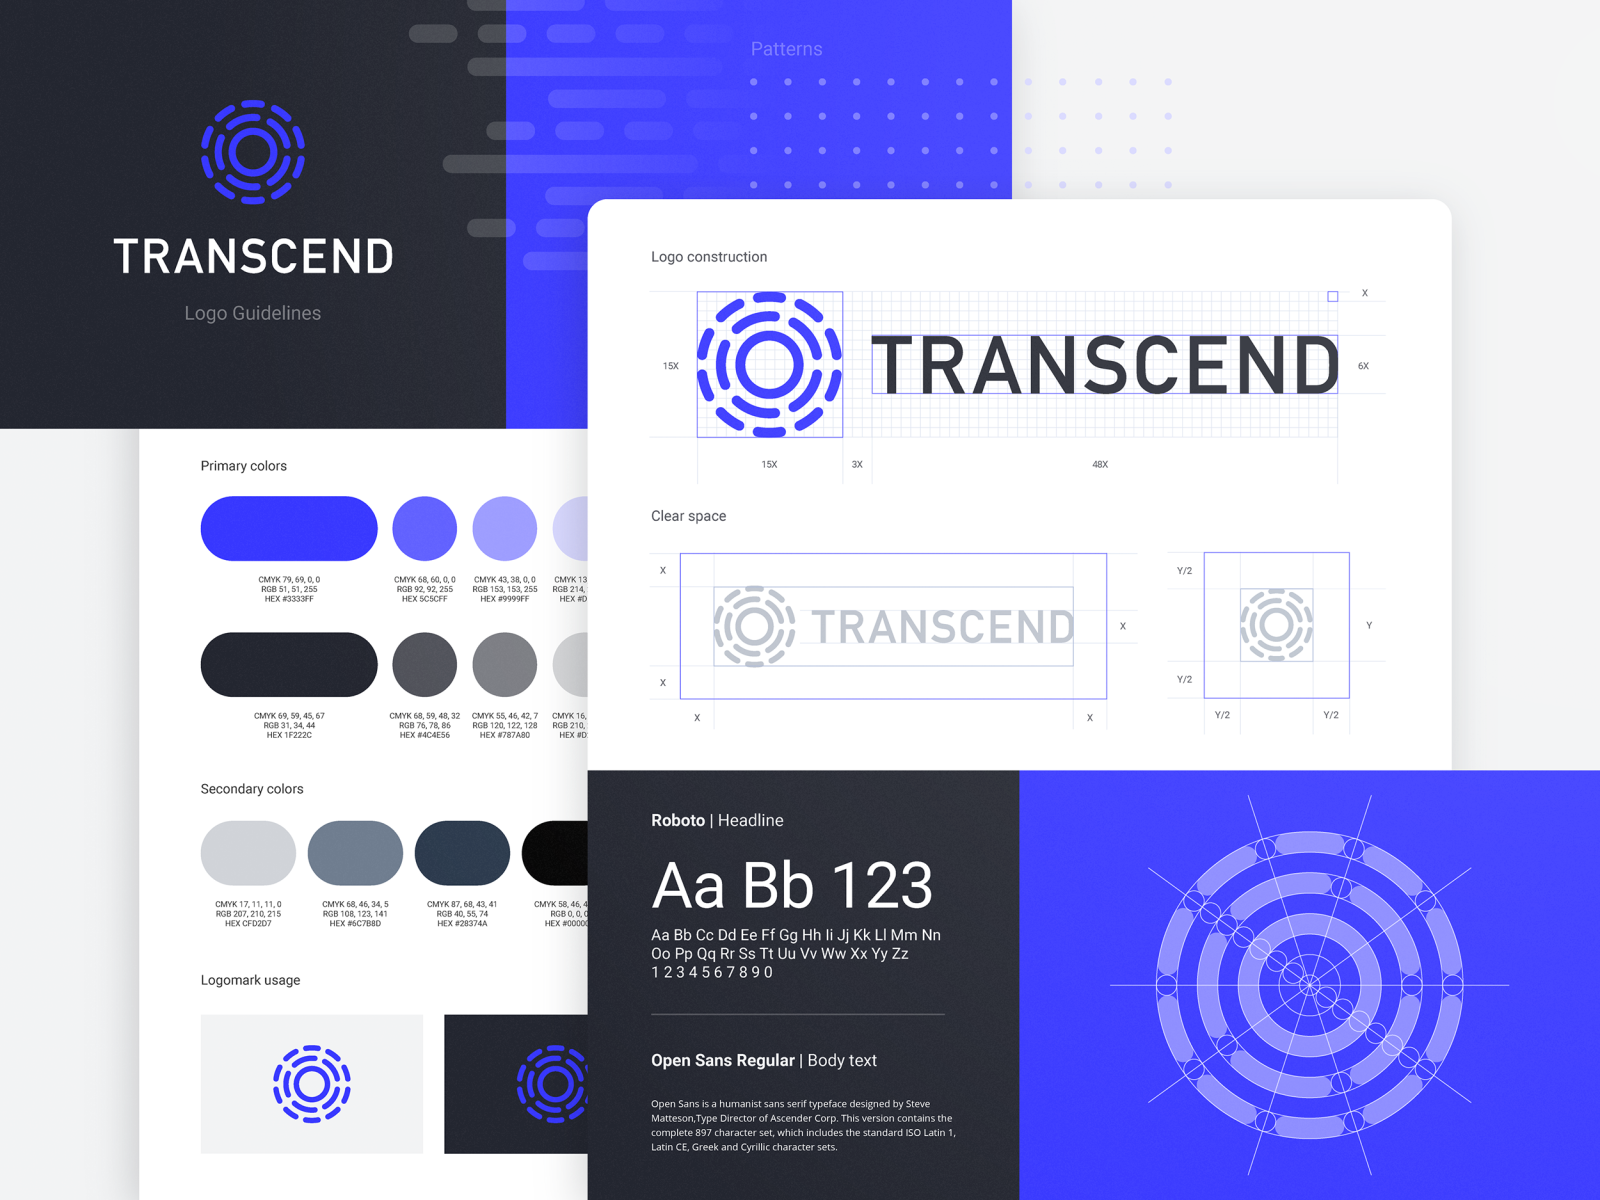 Transcend Visual Brand Identity Guidelines by Ramotion on Dribbble